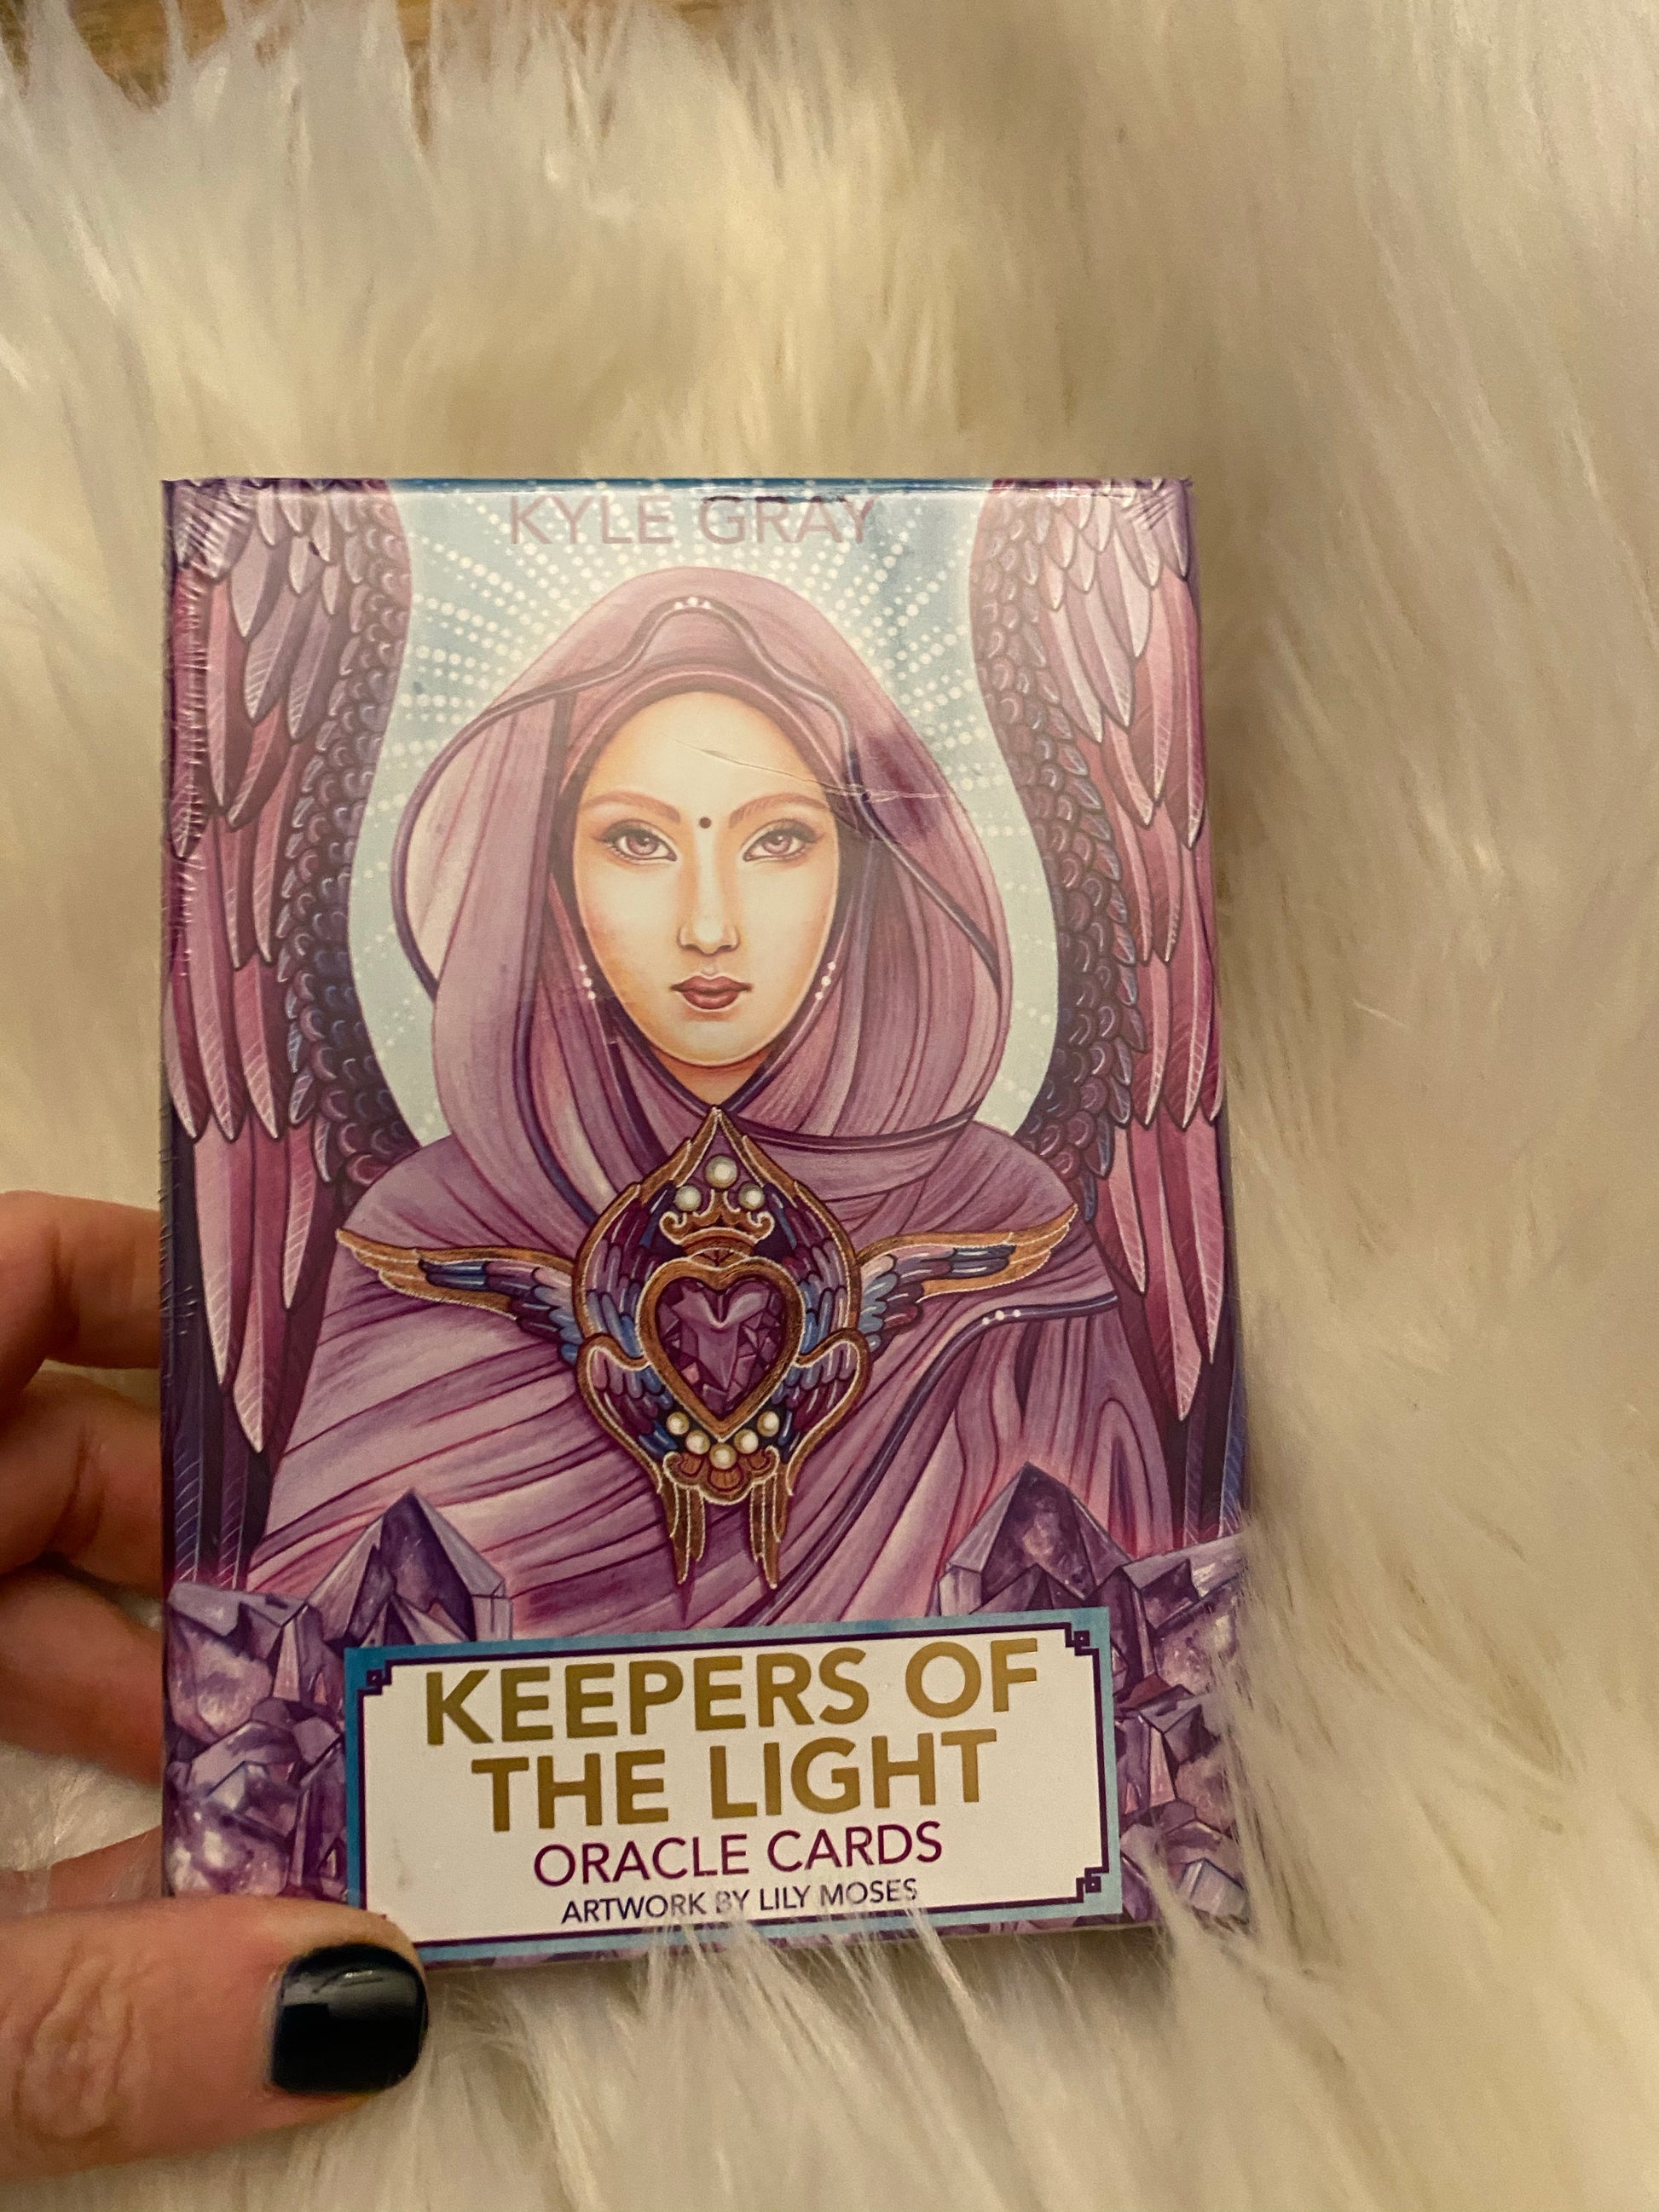 The Keepers of the Light Oracle by Kyle Grey - The Healing Collective NY 